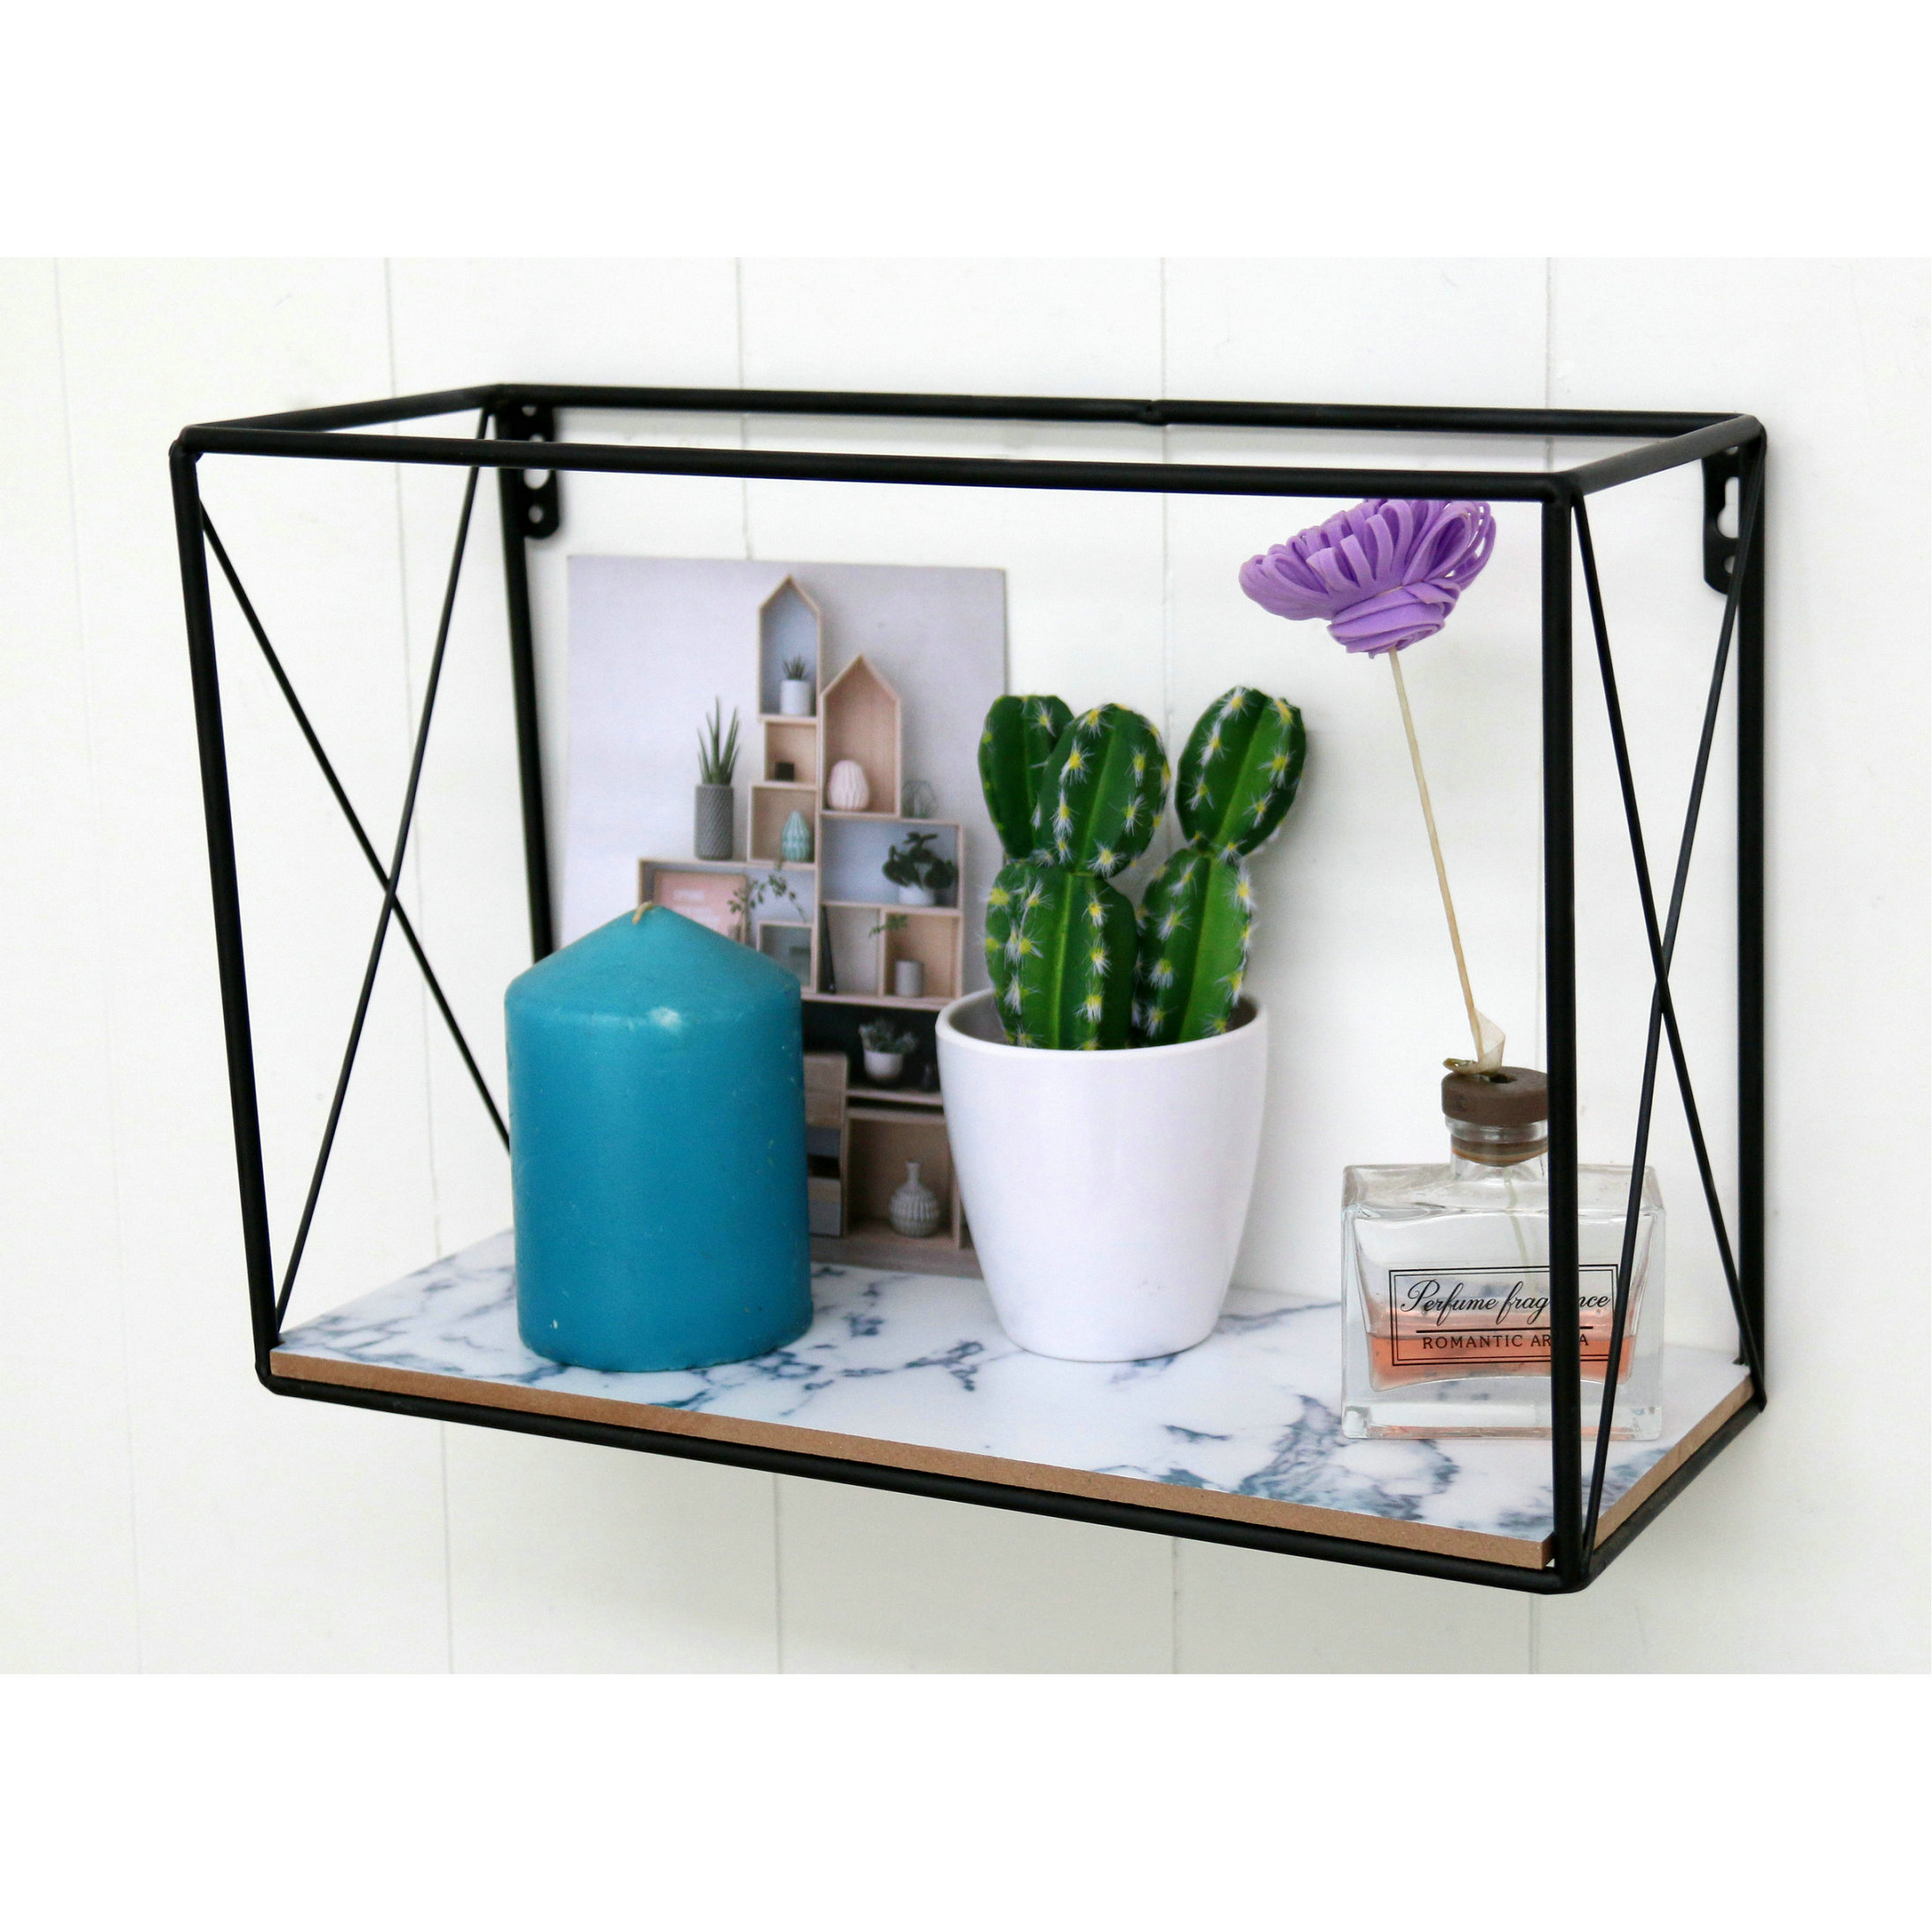 FU-21289 The wire frame with wooden board 32.5x12.5x22.5cm